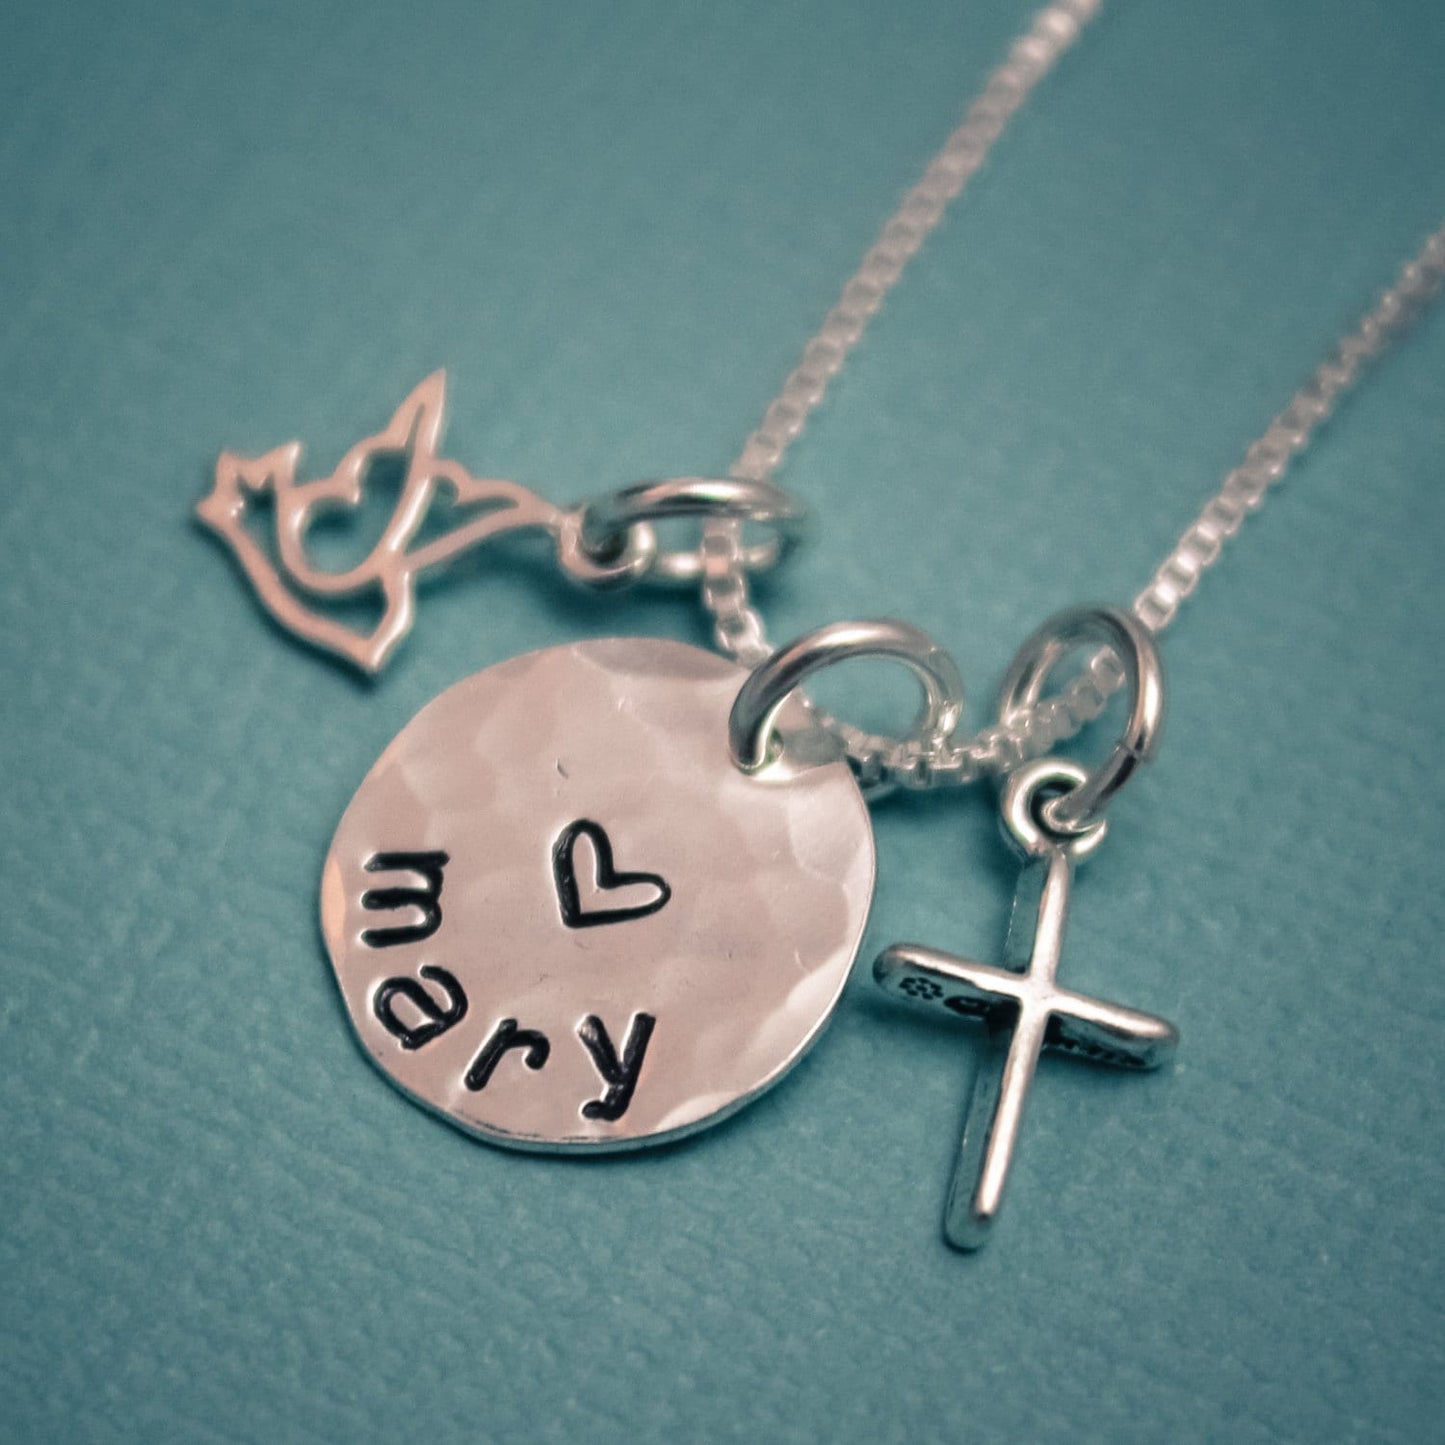 Dove and Cross Charm Necklace for Confirmation Personalized Sterling Silver Hand Stamped Jewelry